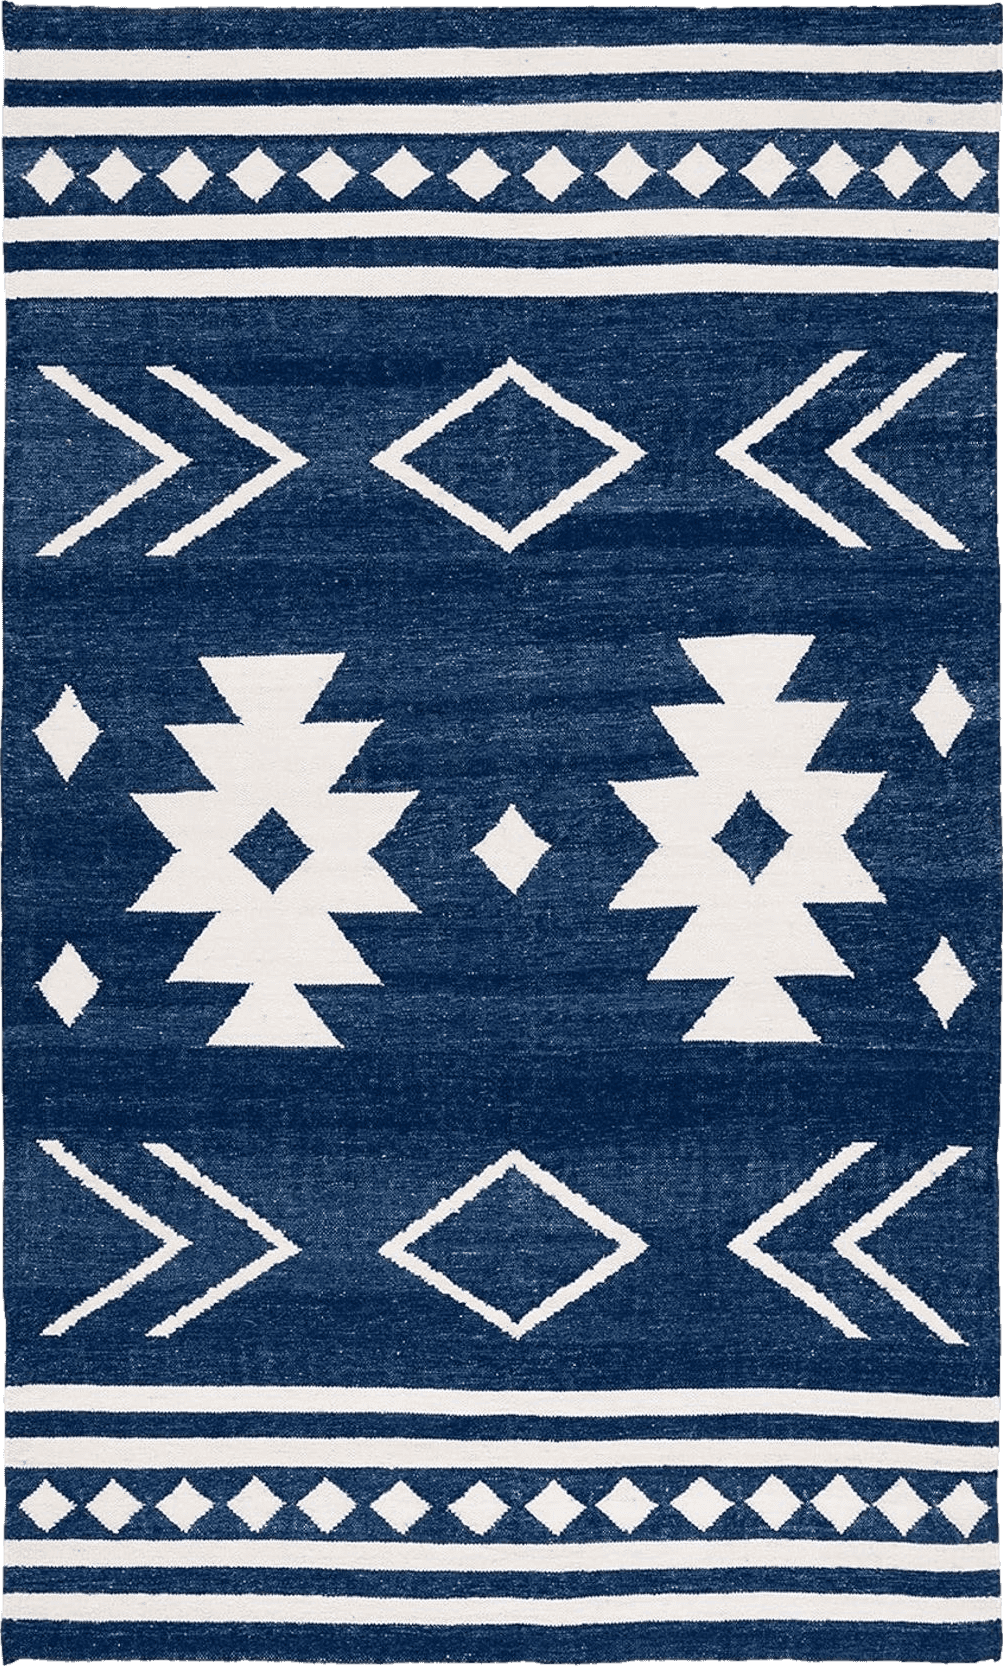 Flatweave Safavieh Kilim Collection Accent Rug - 3' x 5', Navy & Ivory, Flat Weave Rustic Boho Tribal Design, Non-Shedding & Easy Care, Ideal for High Traffic Areas in Entryway, Living Room, Bedroom (KLM764N)